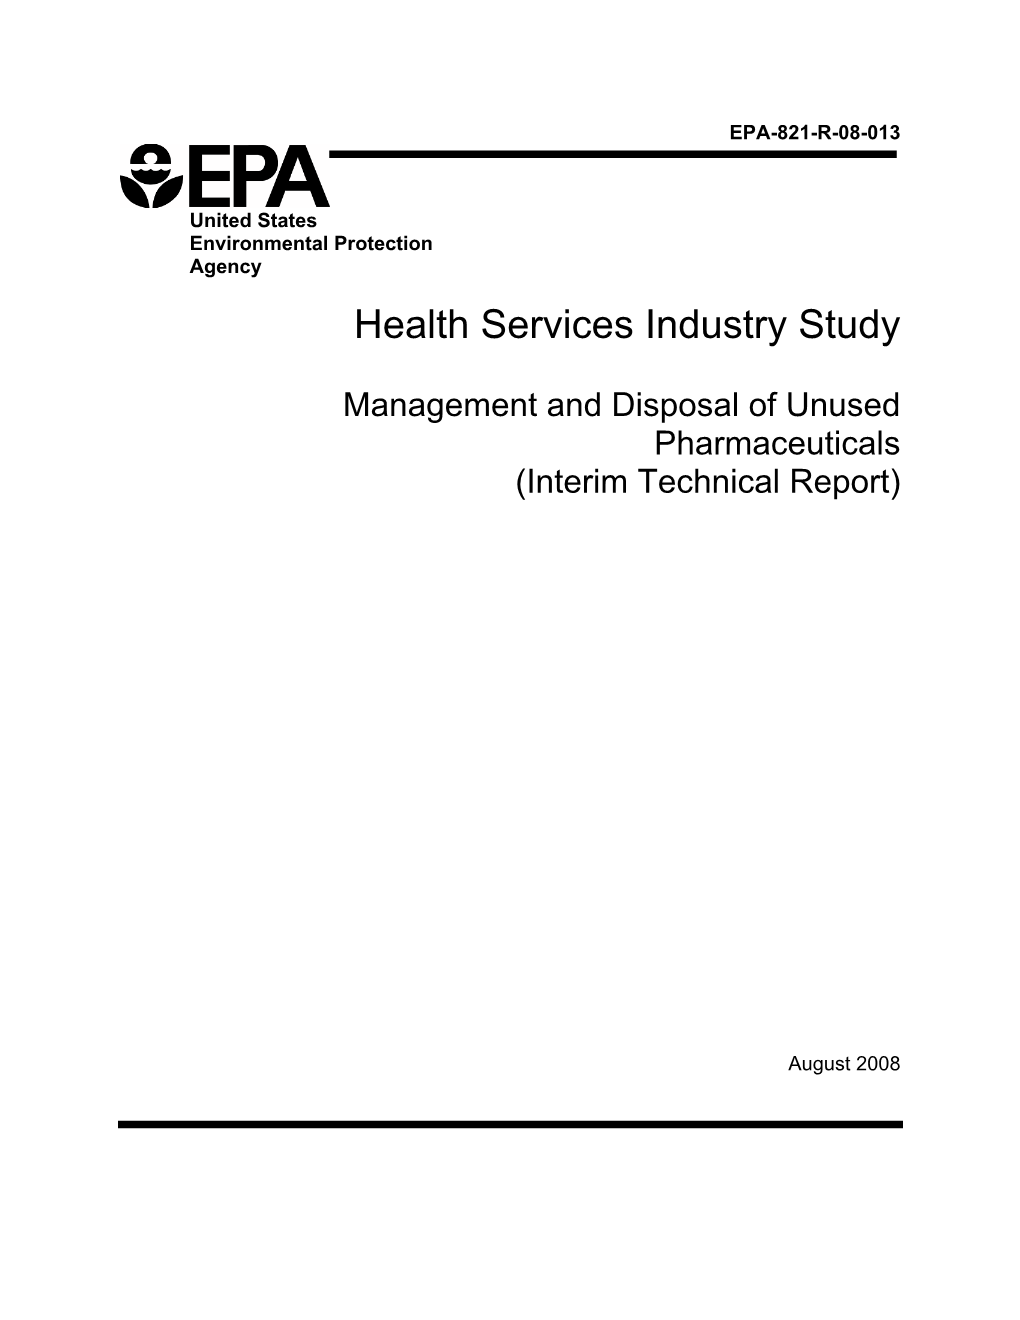 Health Services Industry Study